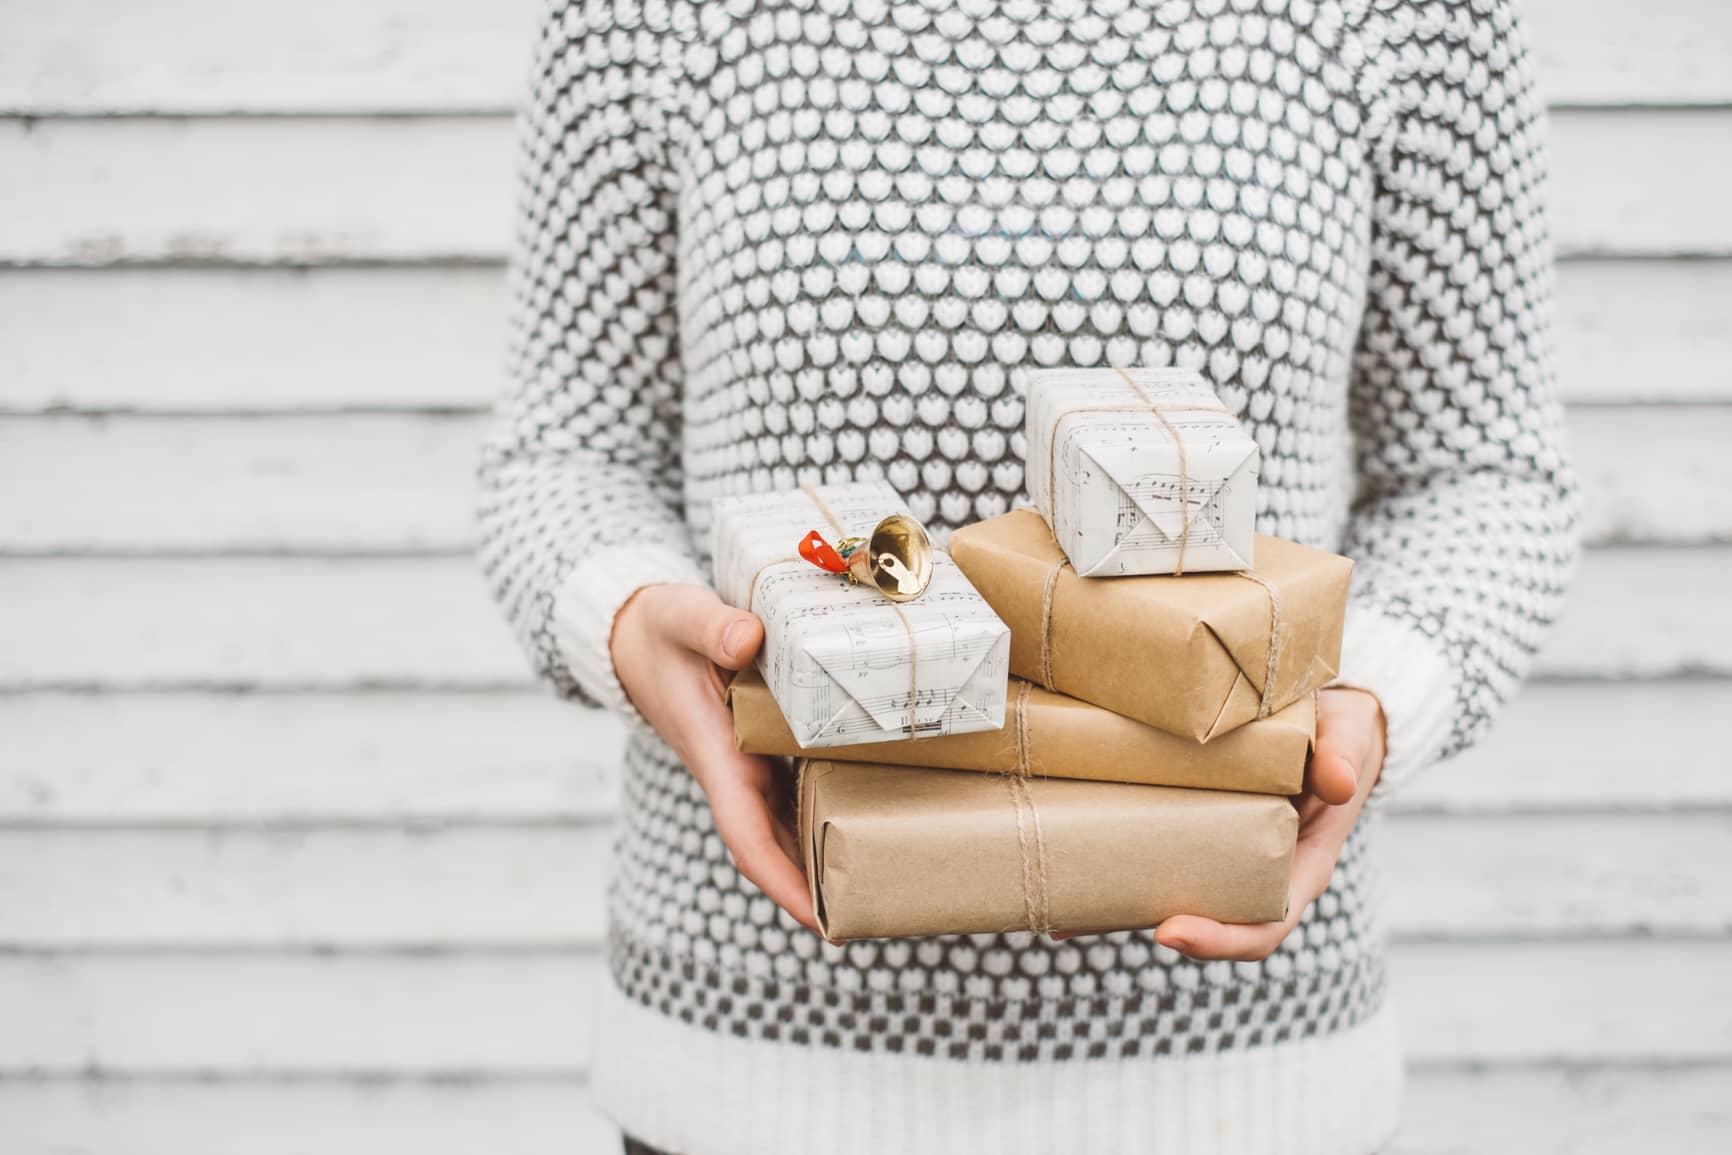 15 Little Gifts to Have On Hand